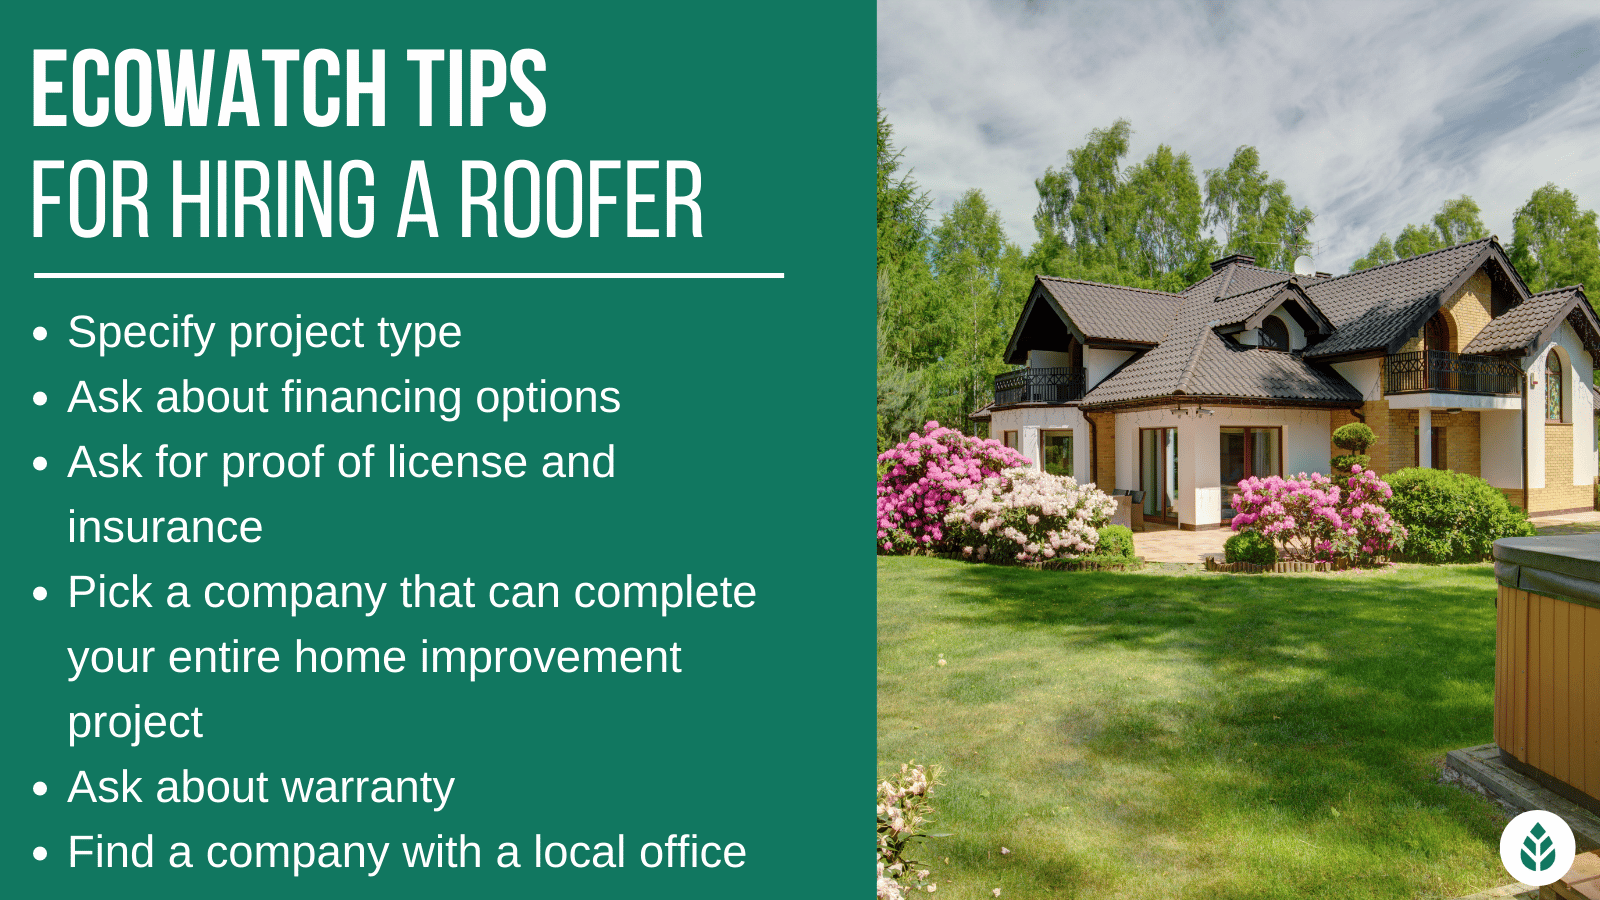 EcoWatch Tips for Hiring a Roofer